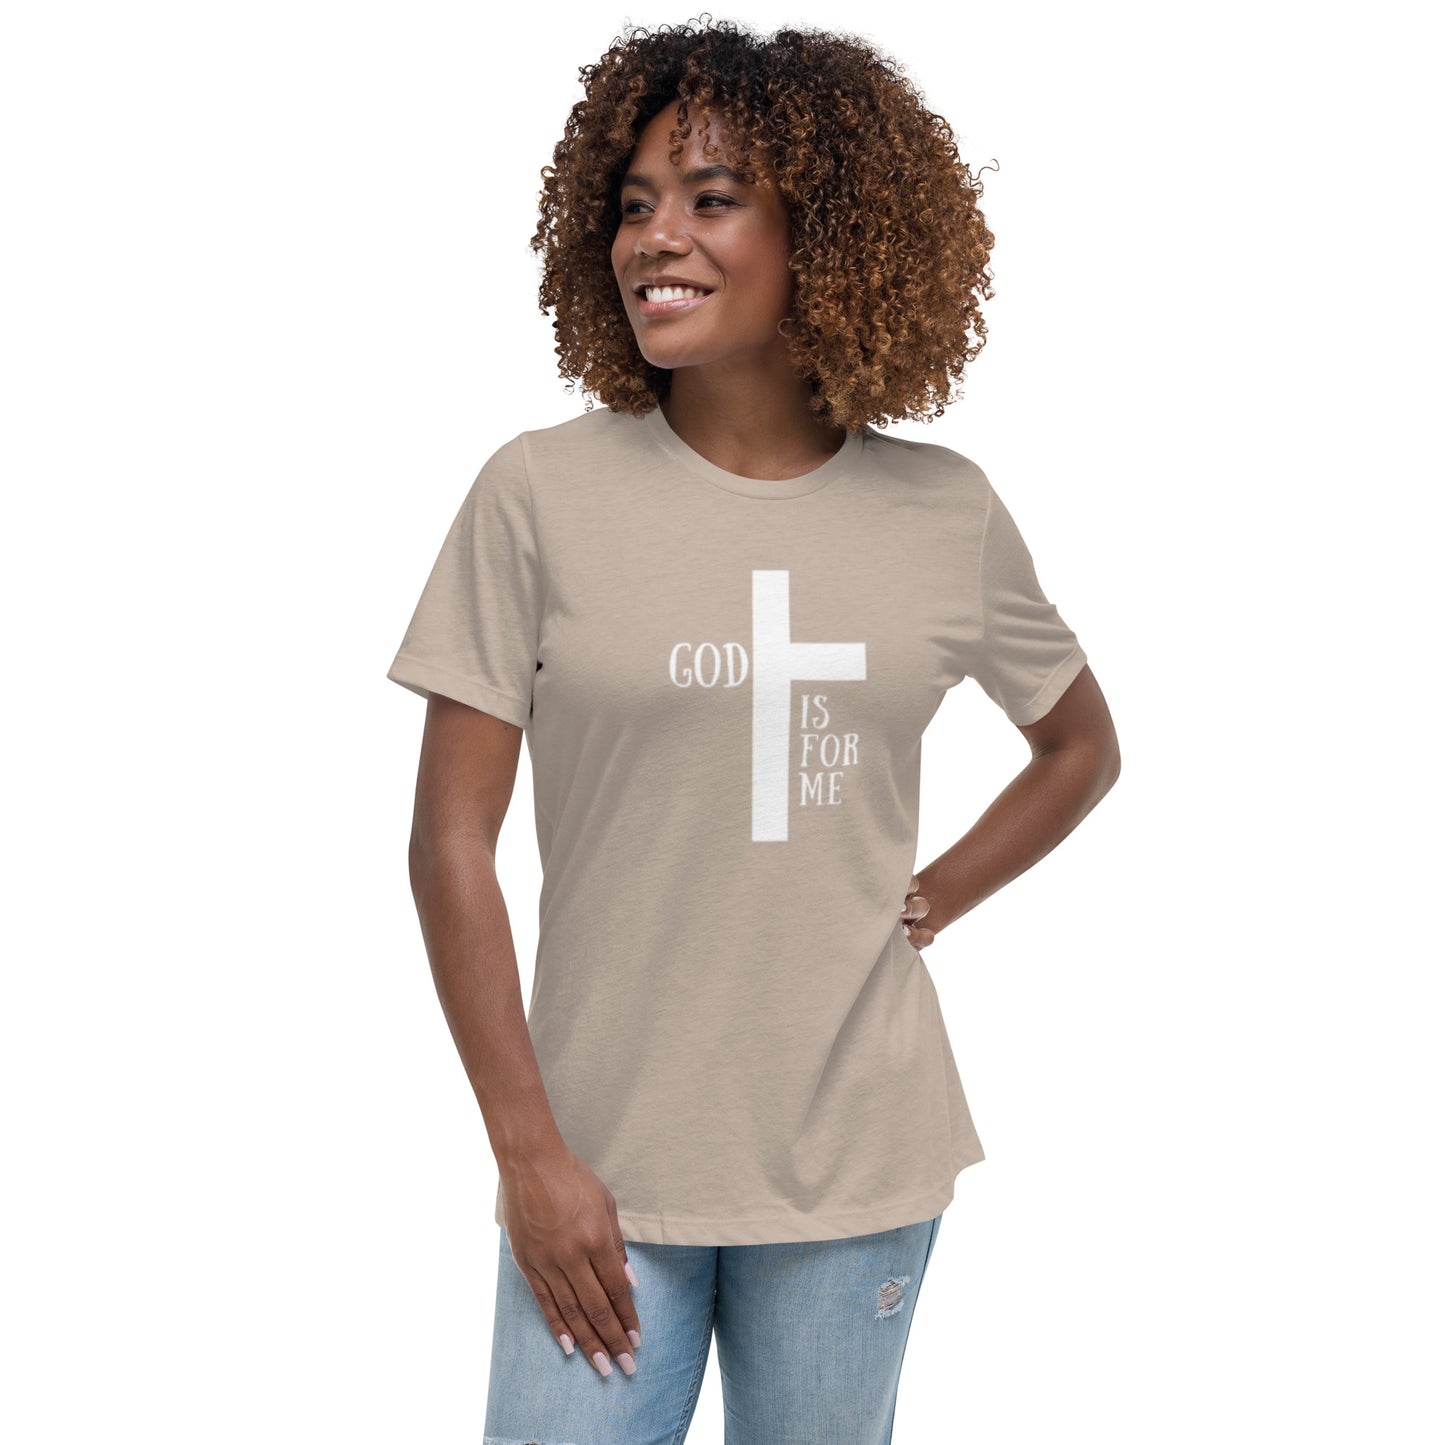 God Is For Me - Women's Relaxed T-Shirt